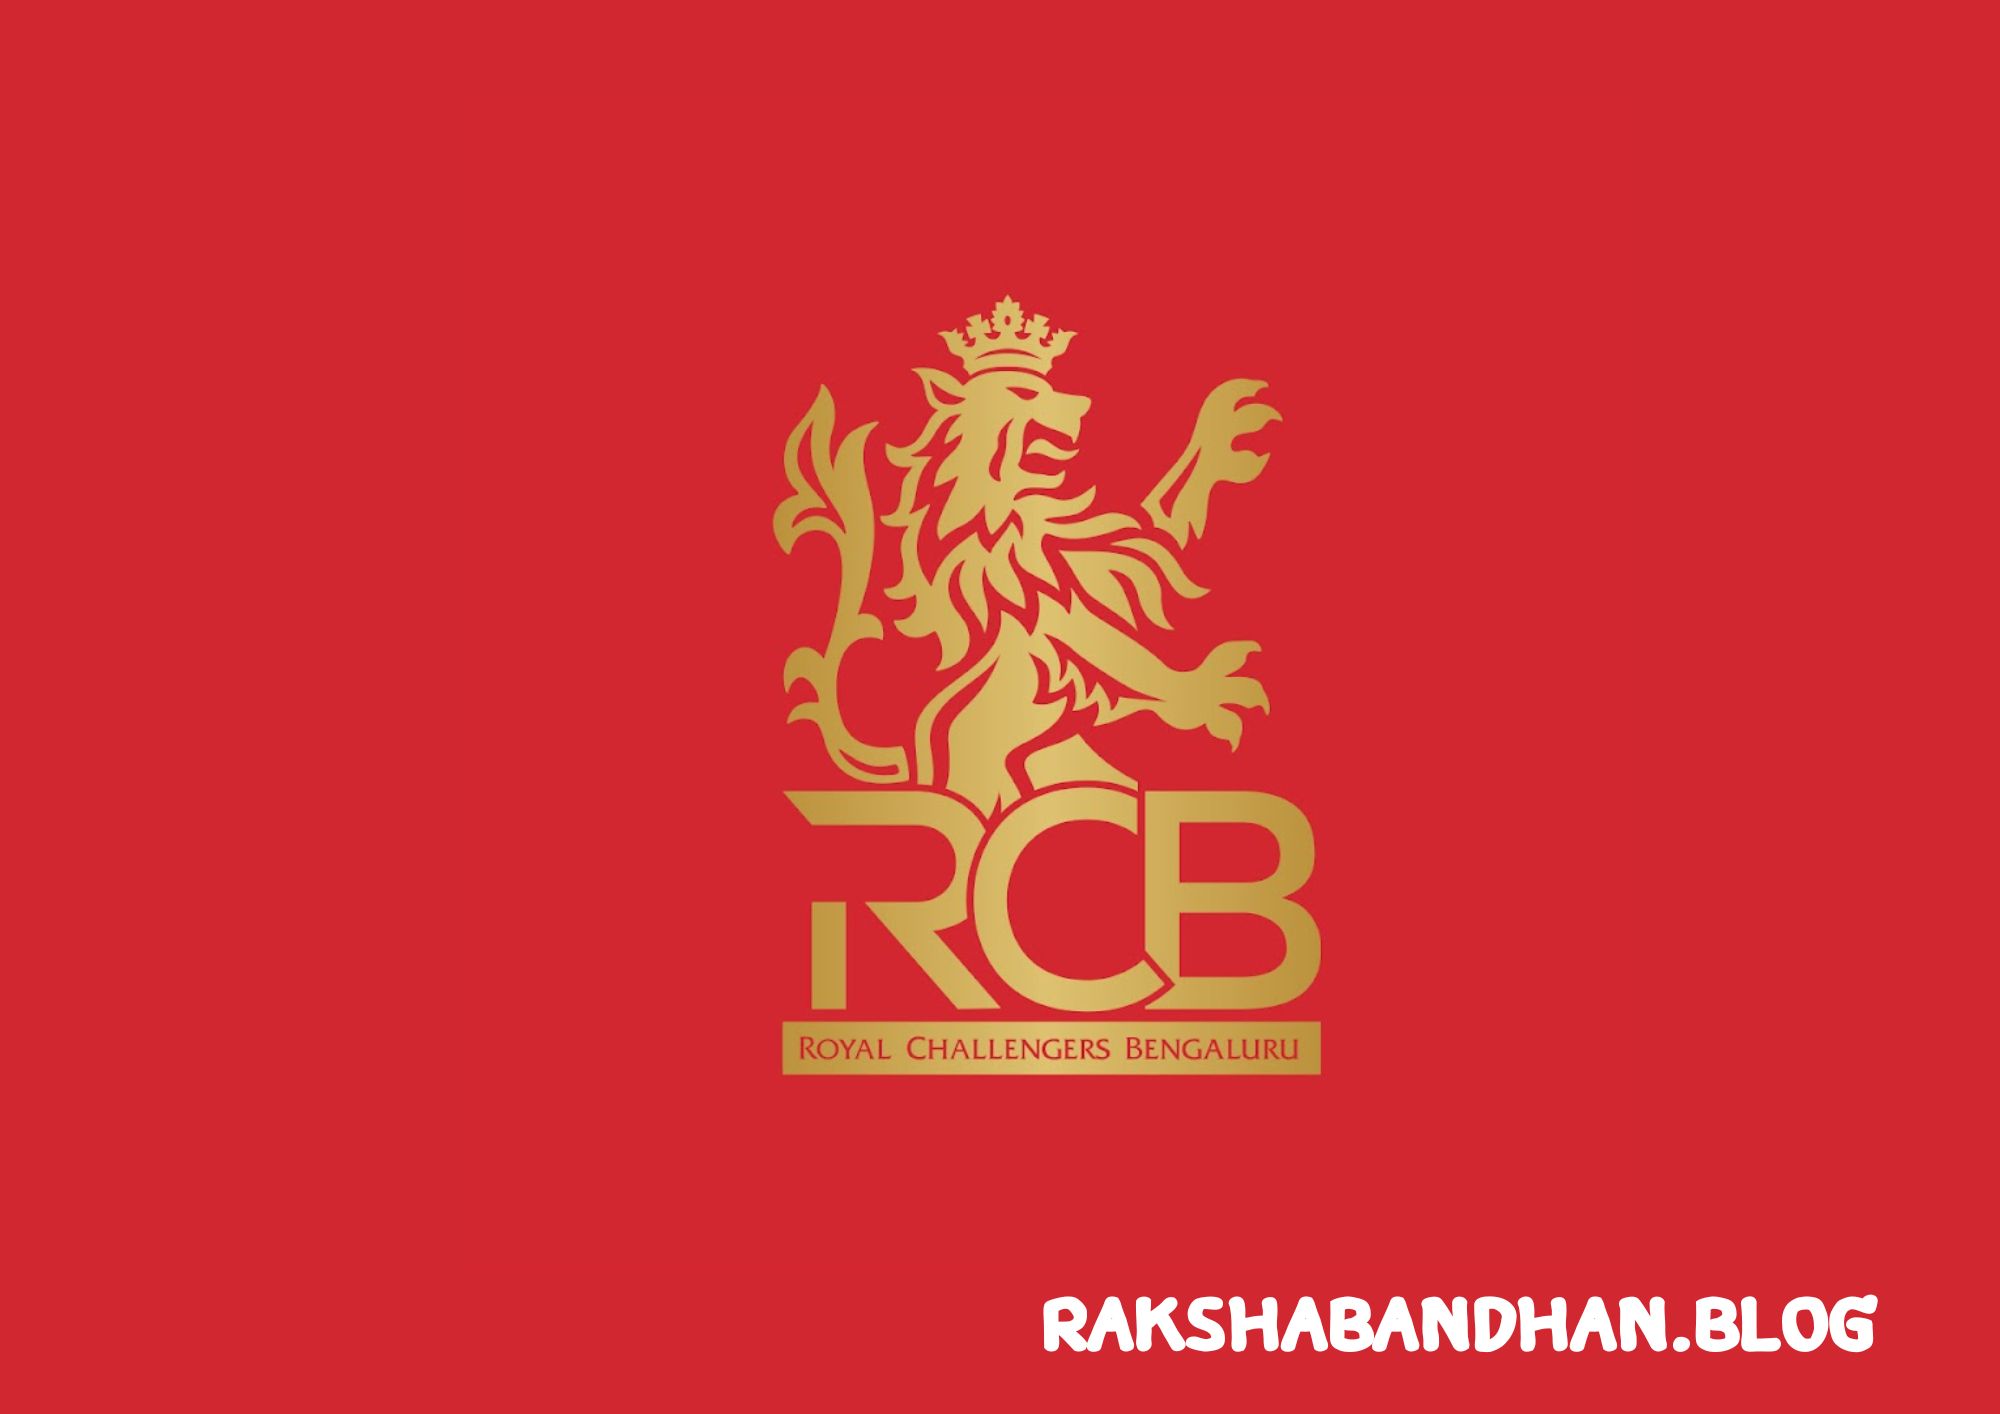 Who Is The Royal Challengers Bangalore Owner (RCB Owner)